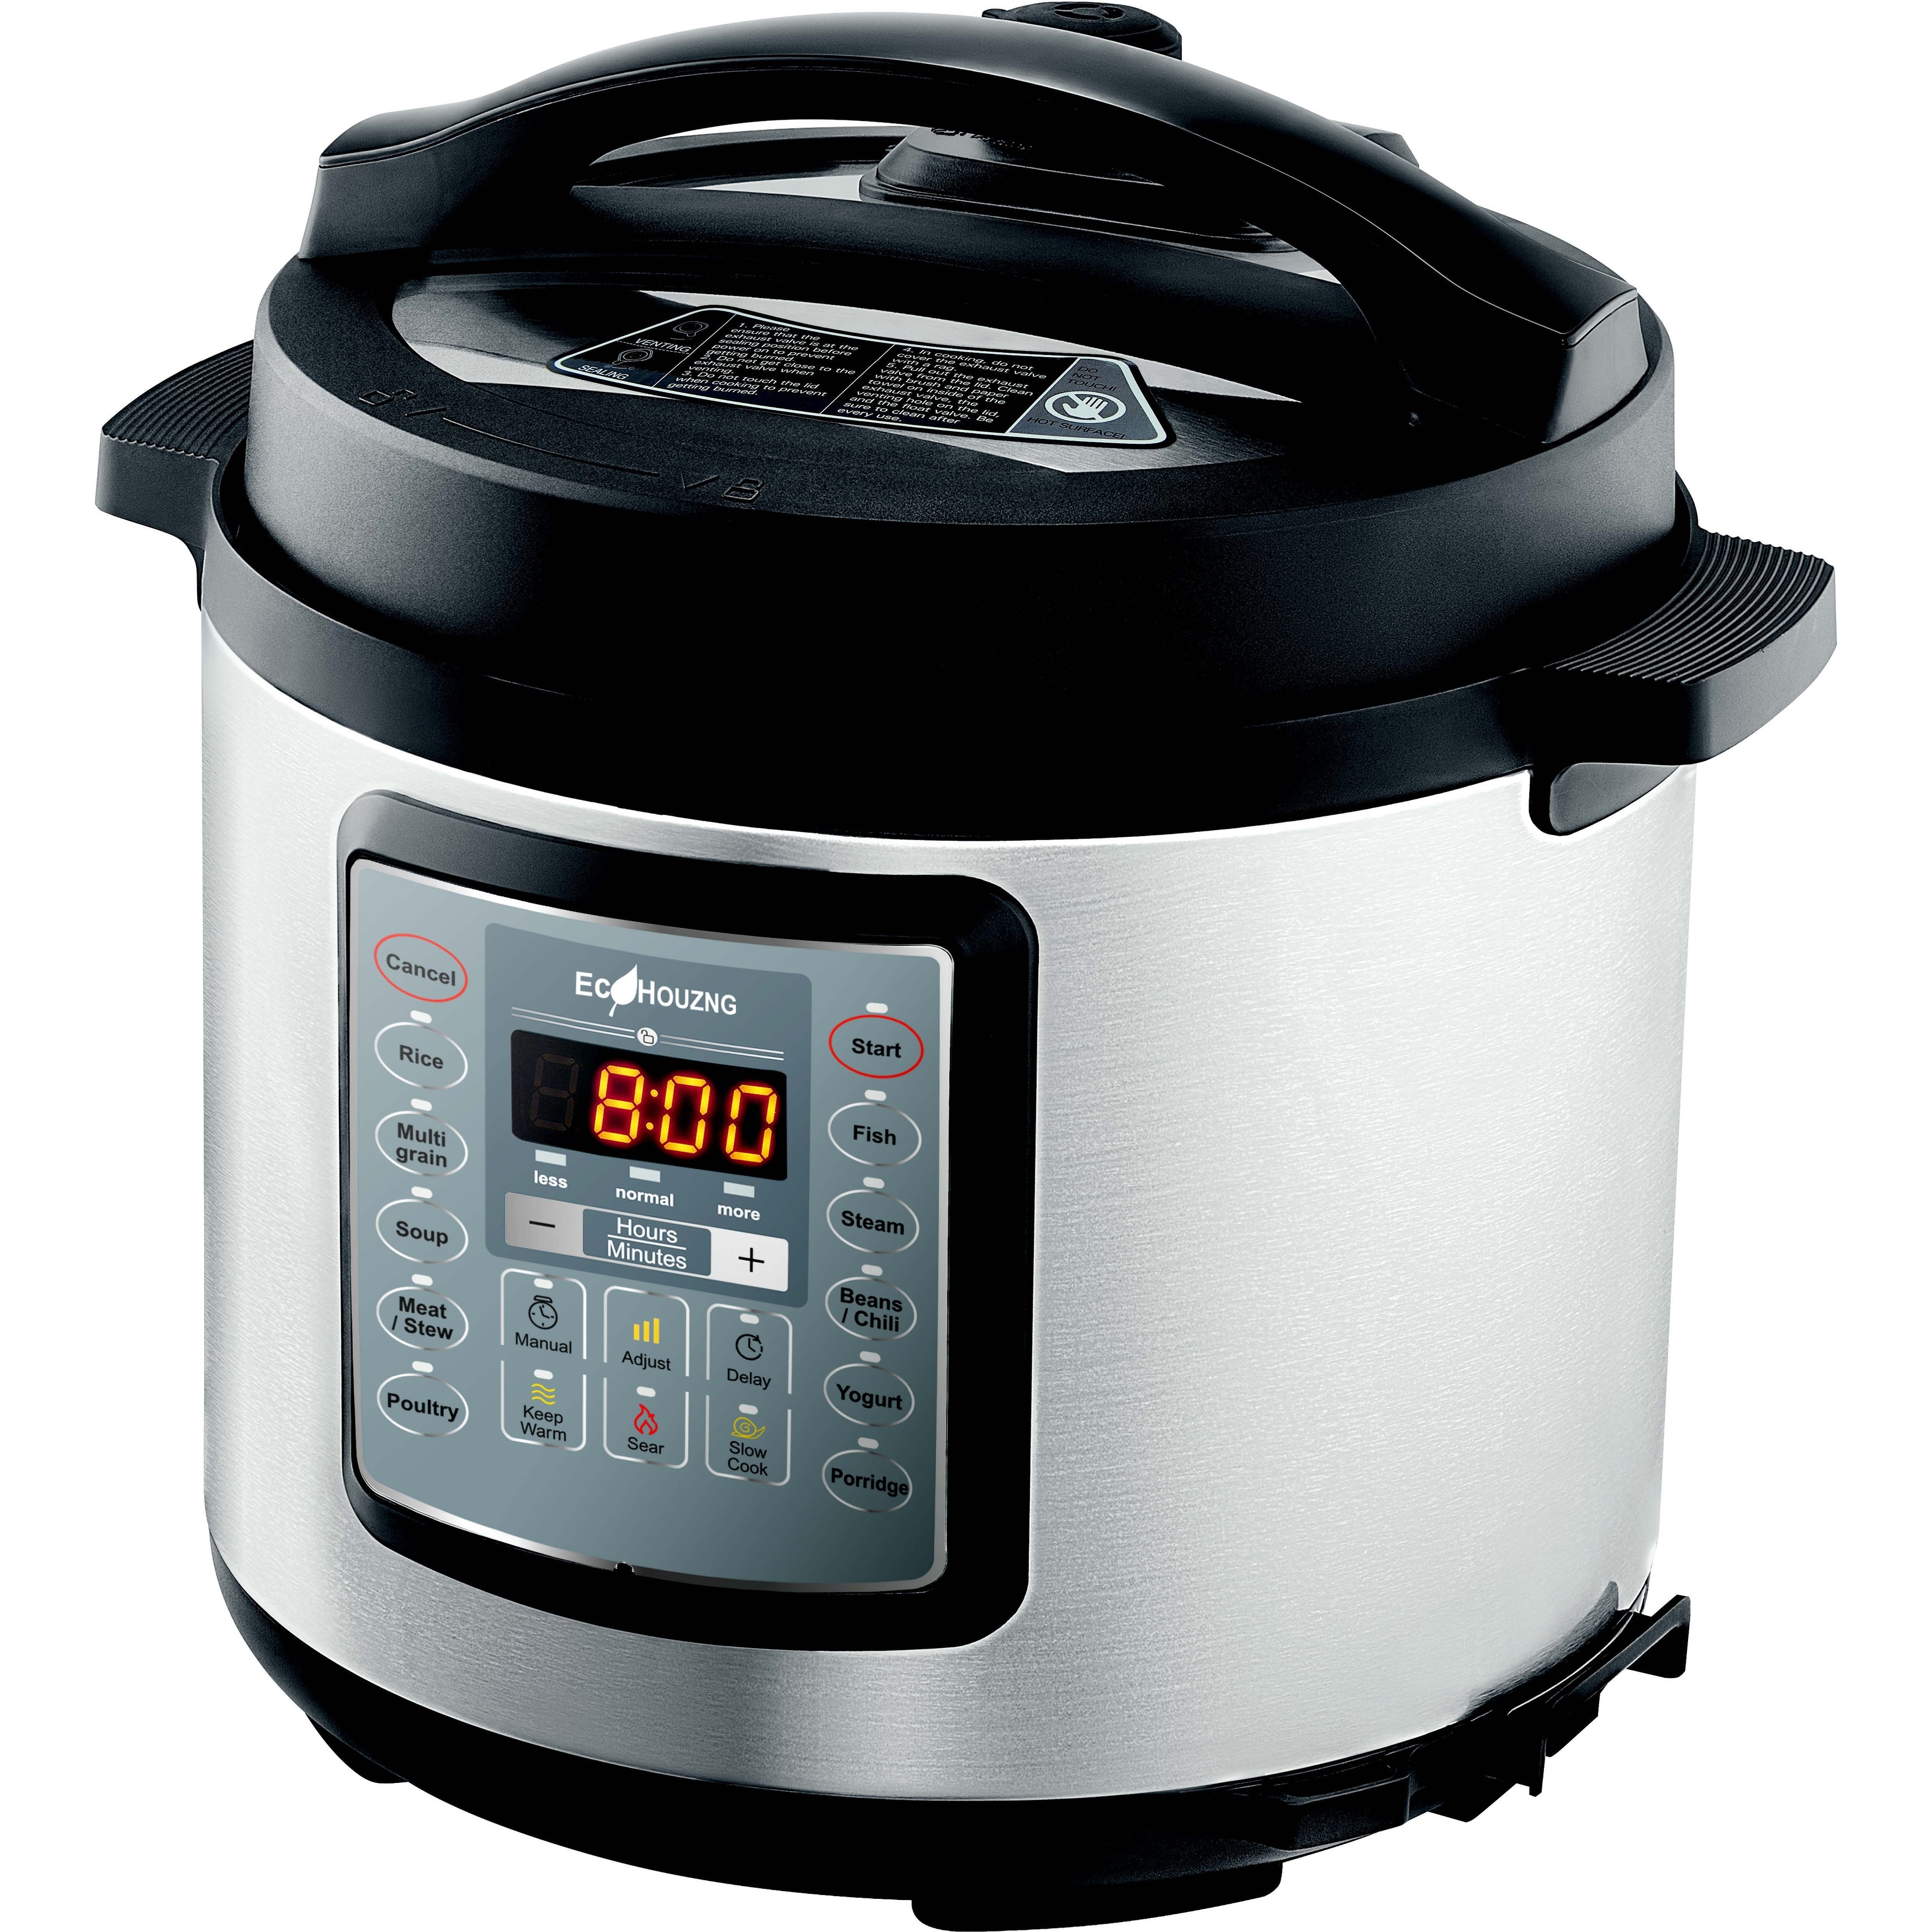 MegaChef 12-Quart Programmable Electric Pressure Cooker in the